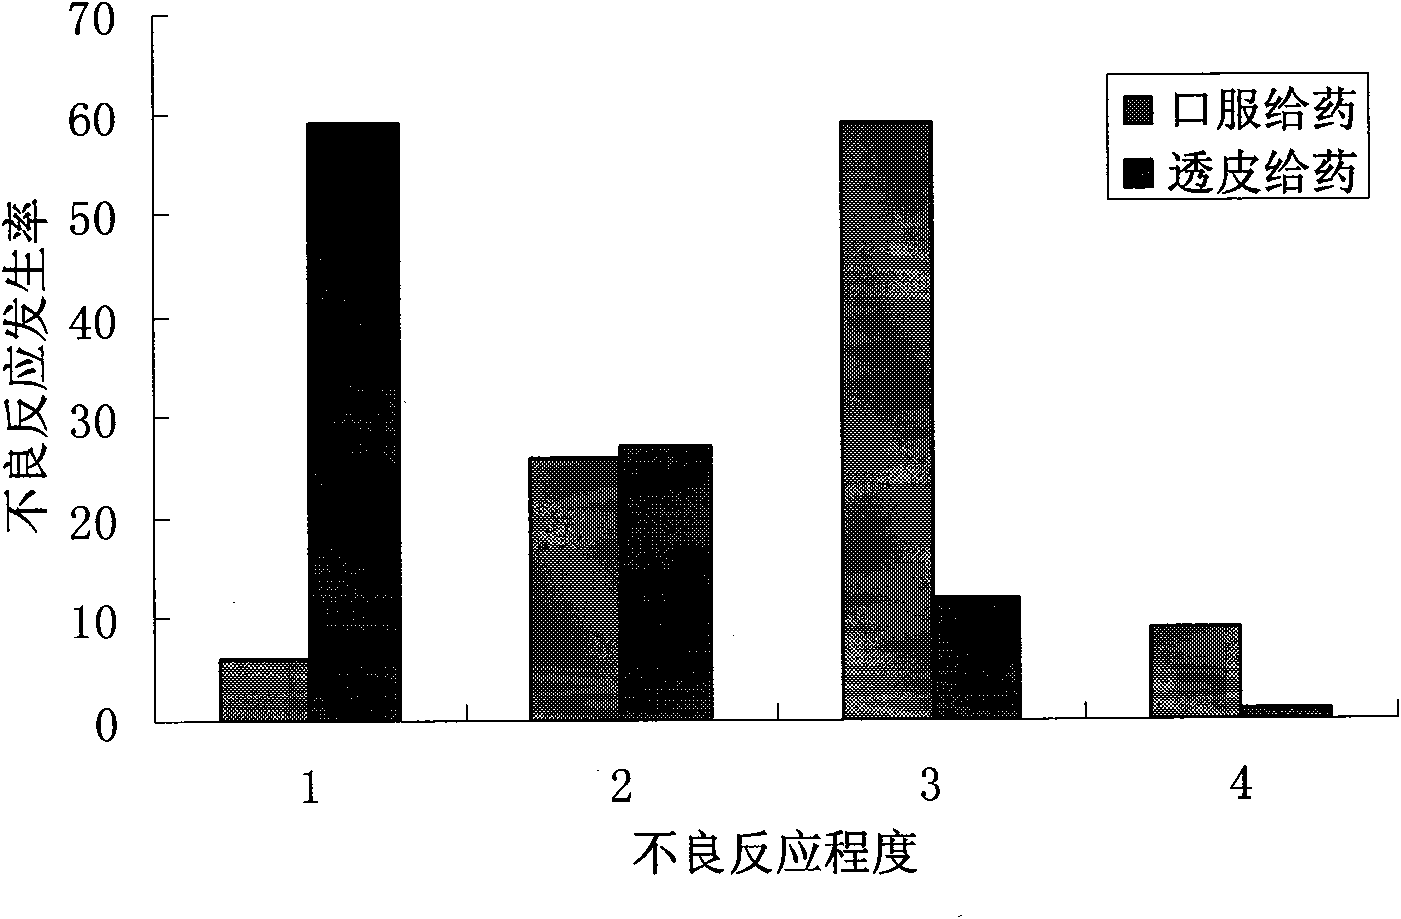 Transdermal absorption preparation of oxybutynin as well as preparation method and medication application thereof